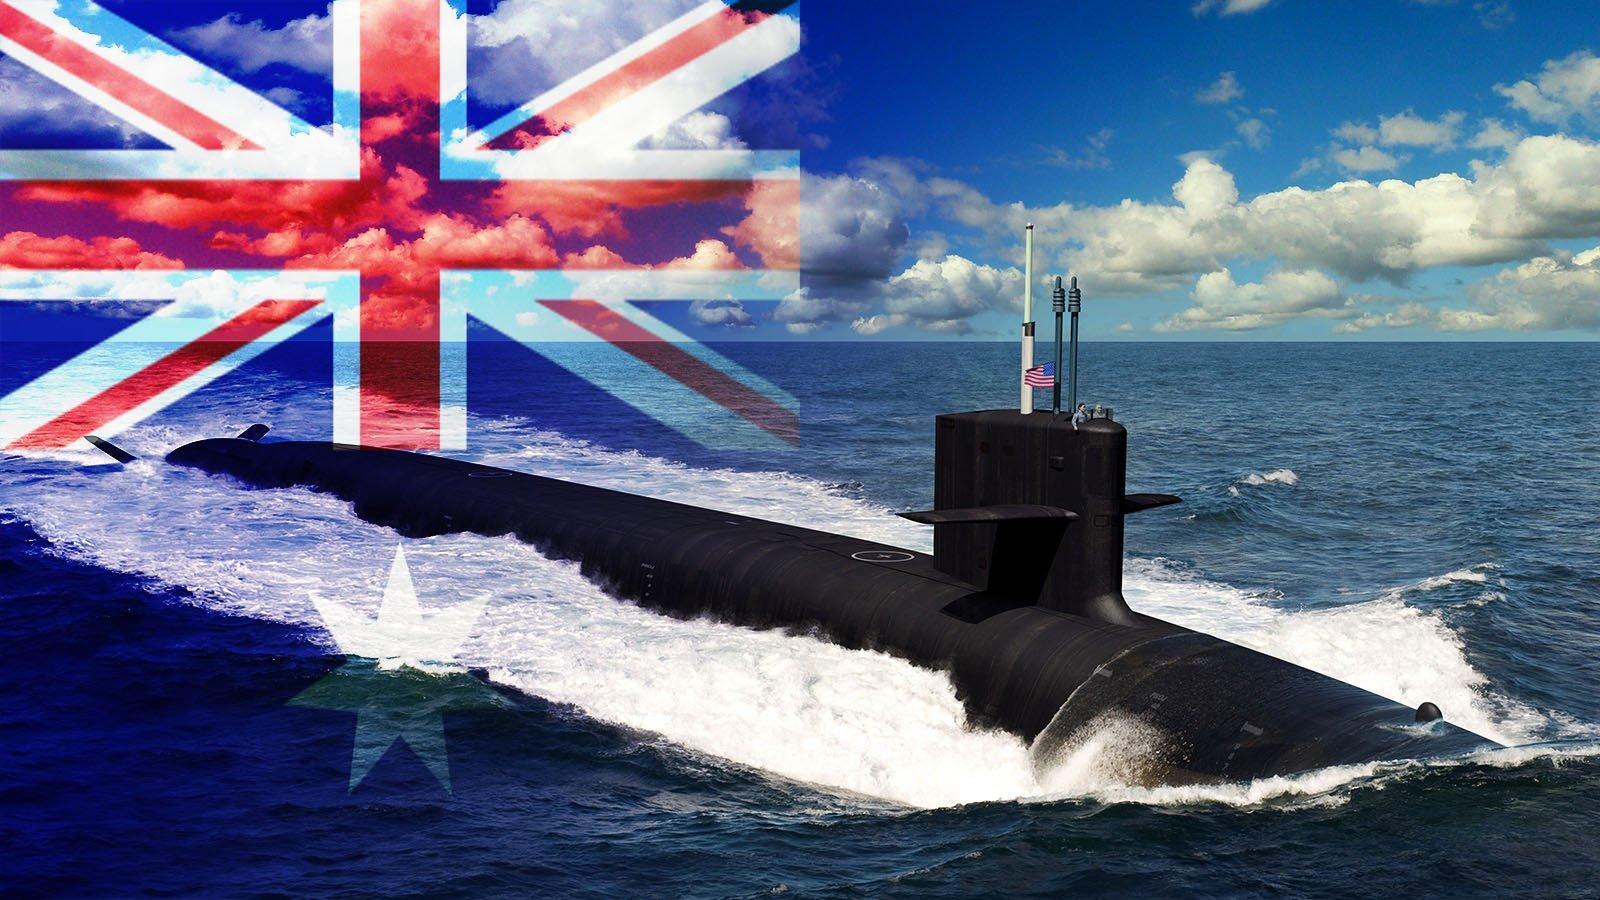 US, UK Agree To ‘Share’ Nuclear Submarine Tech With Australia